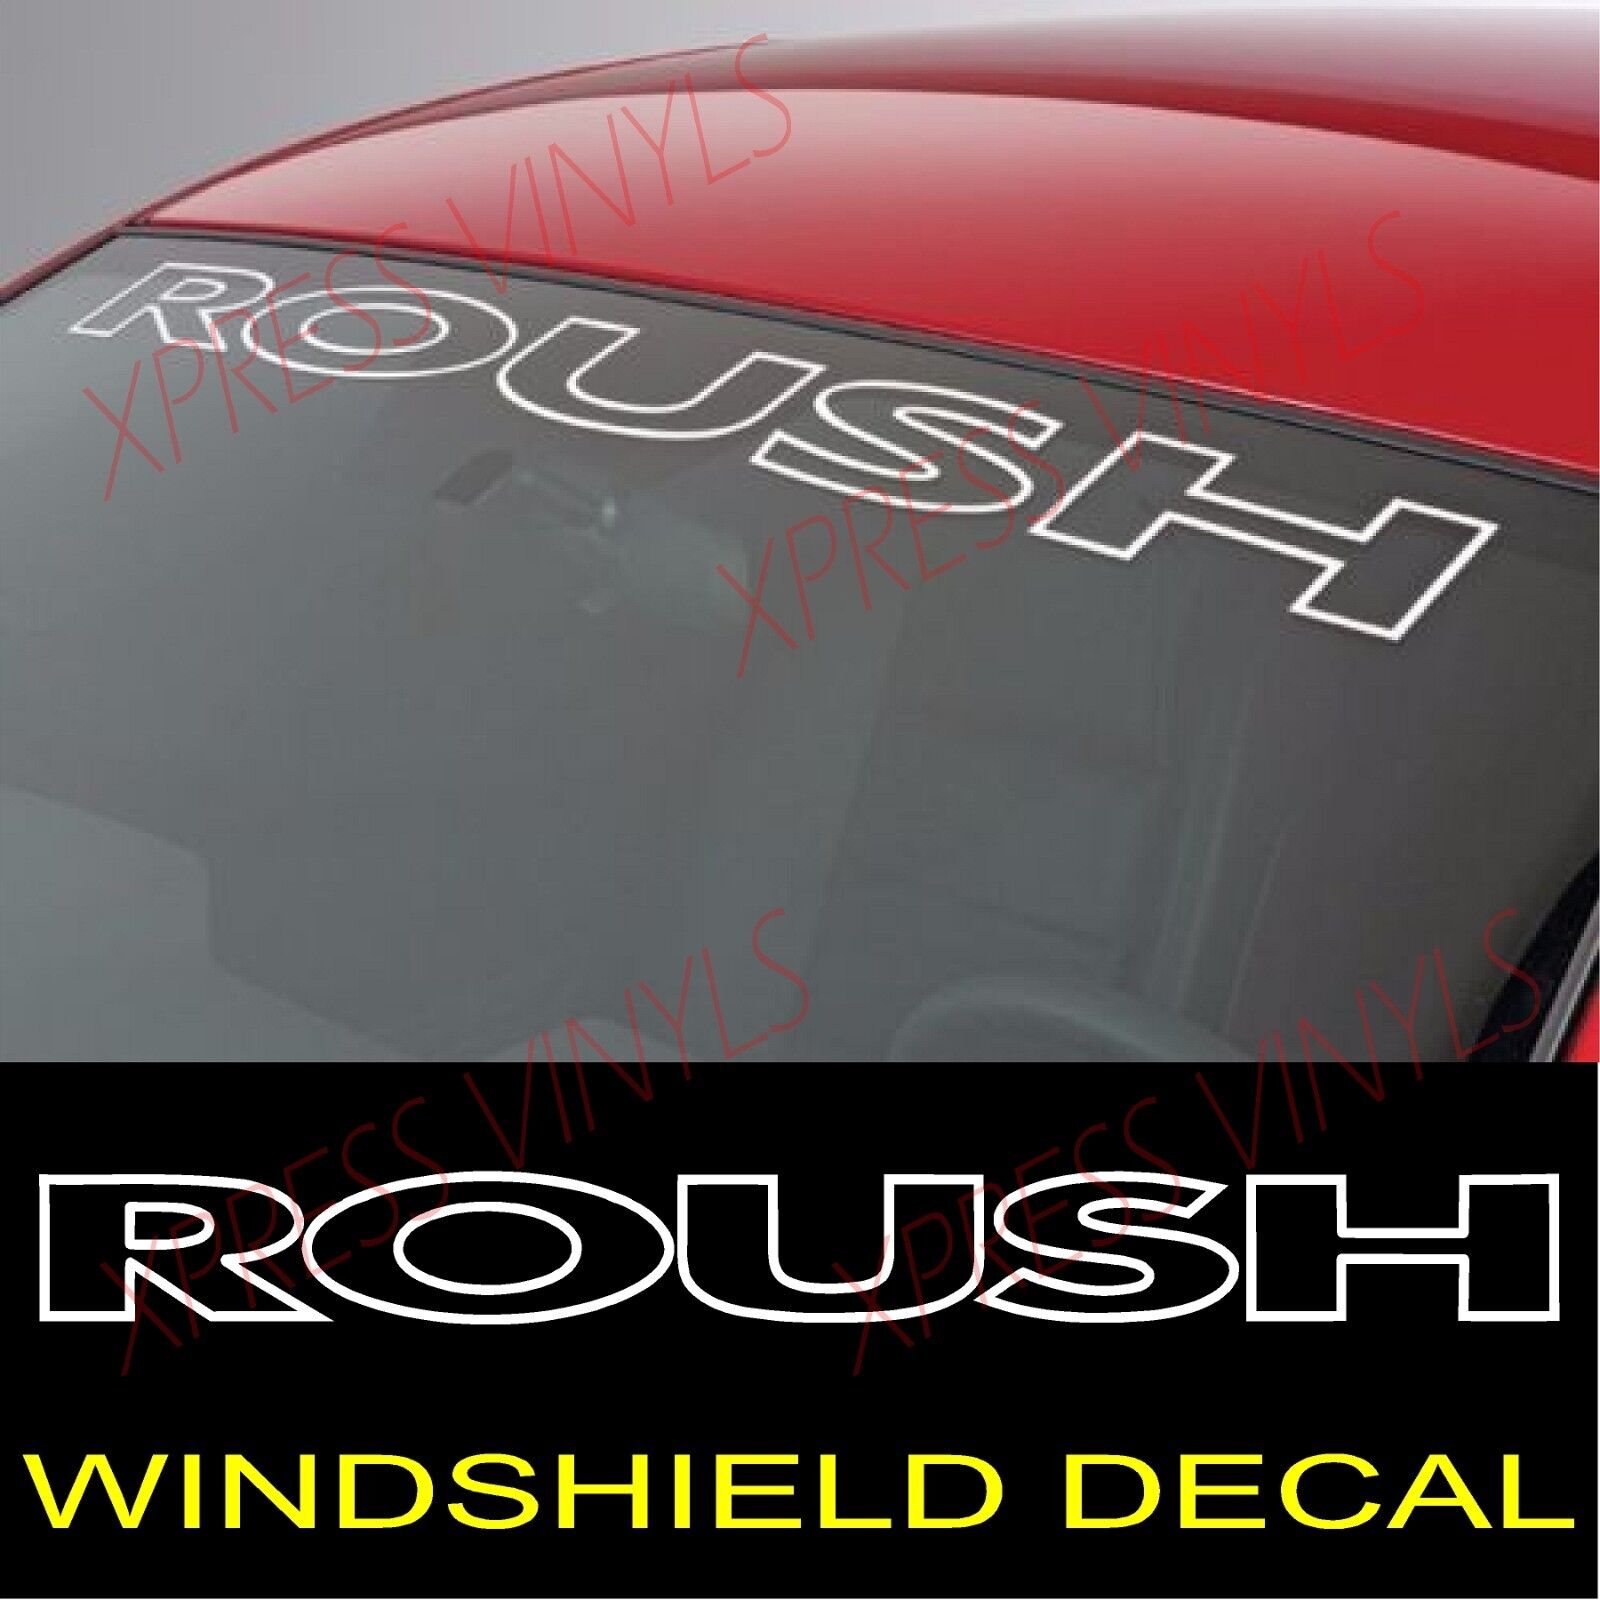 Ford Mustang ROUSH Windshield Vinyl Decal Sticker